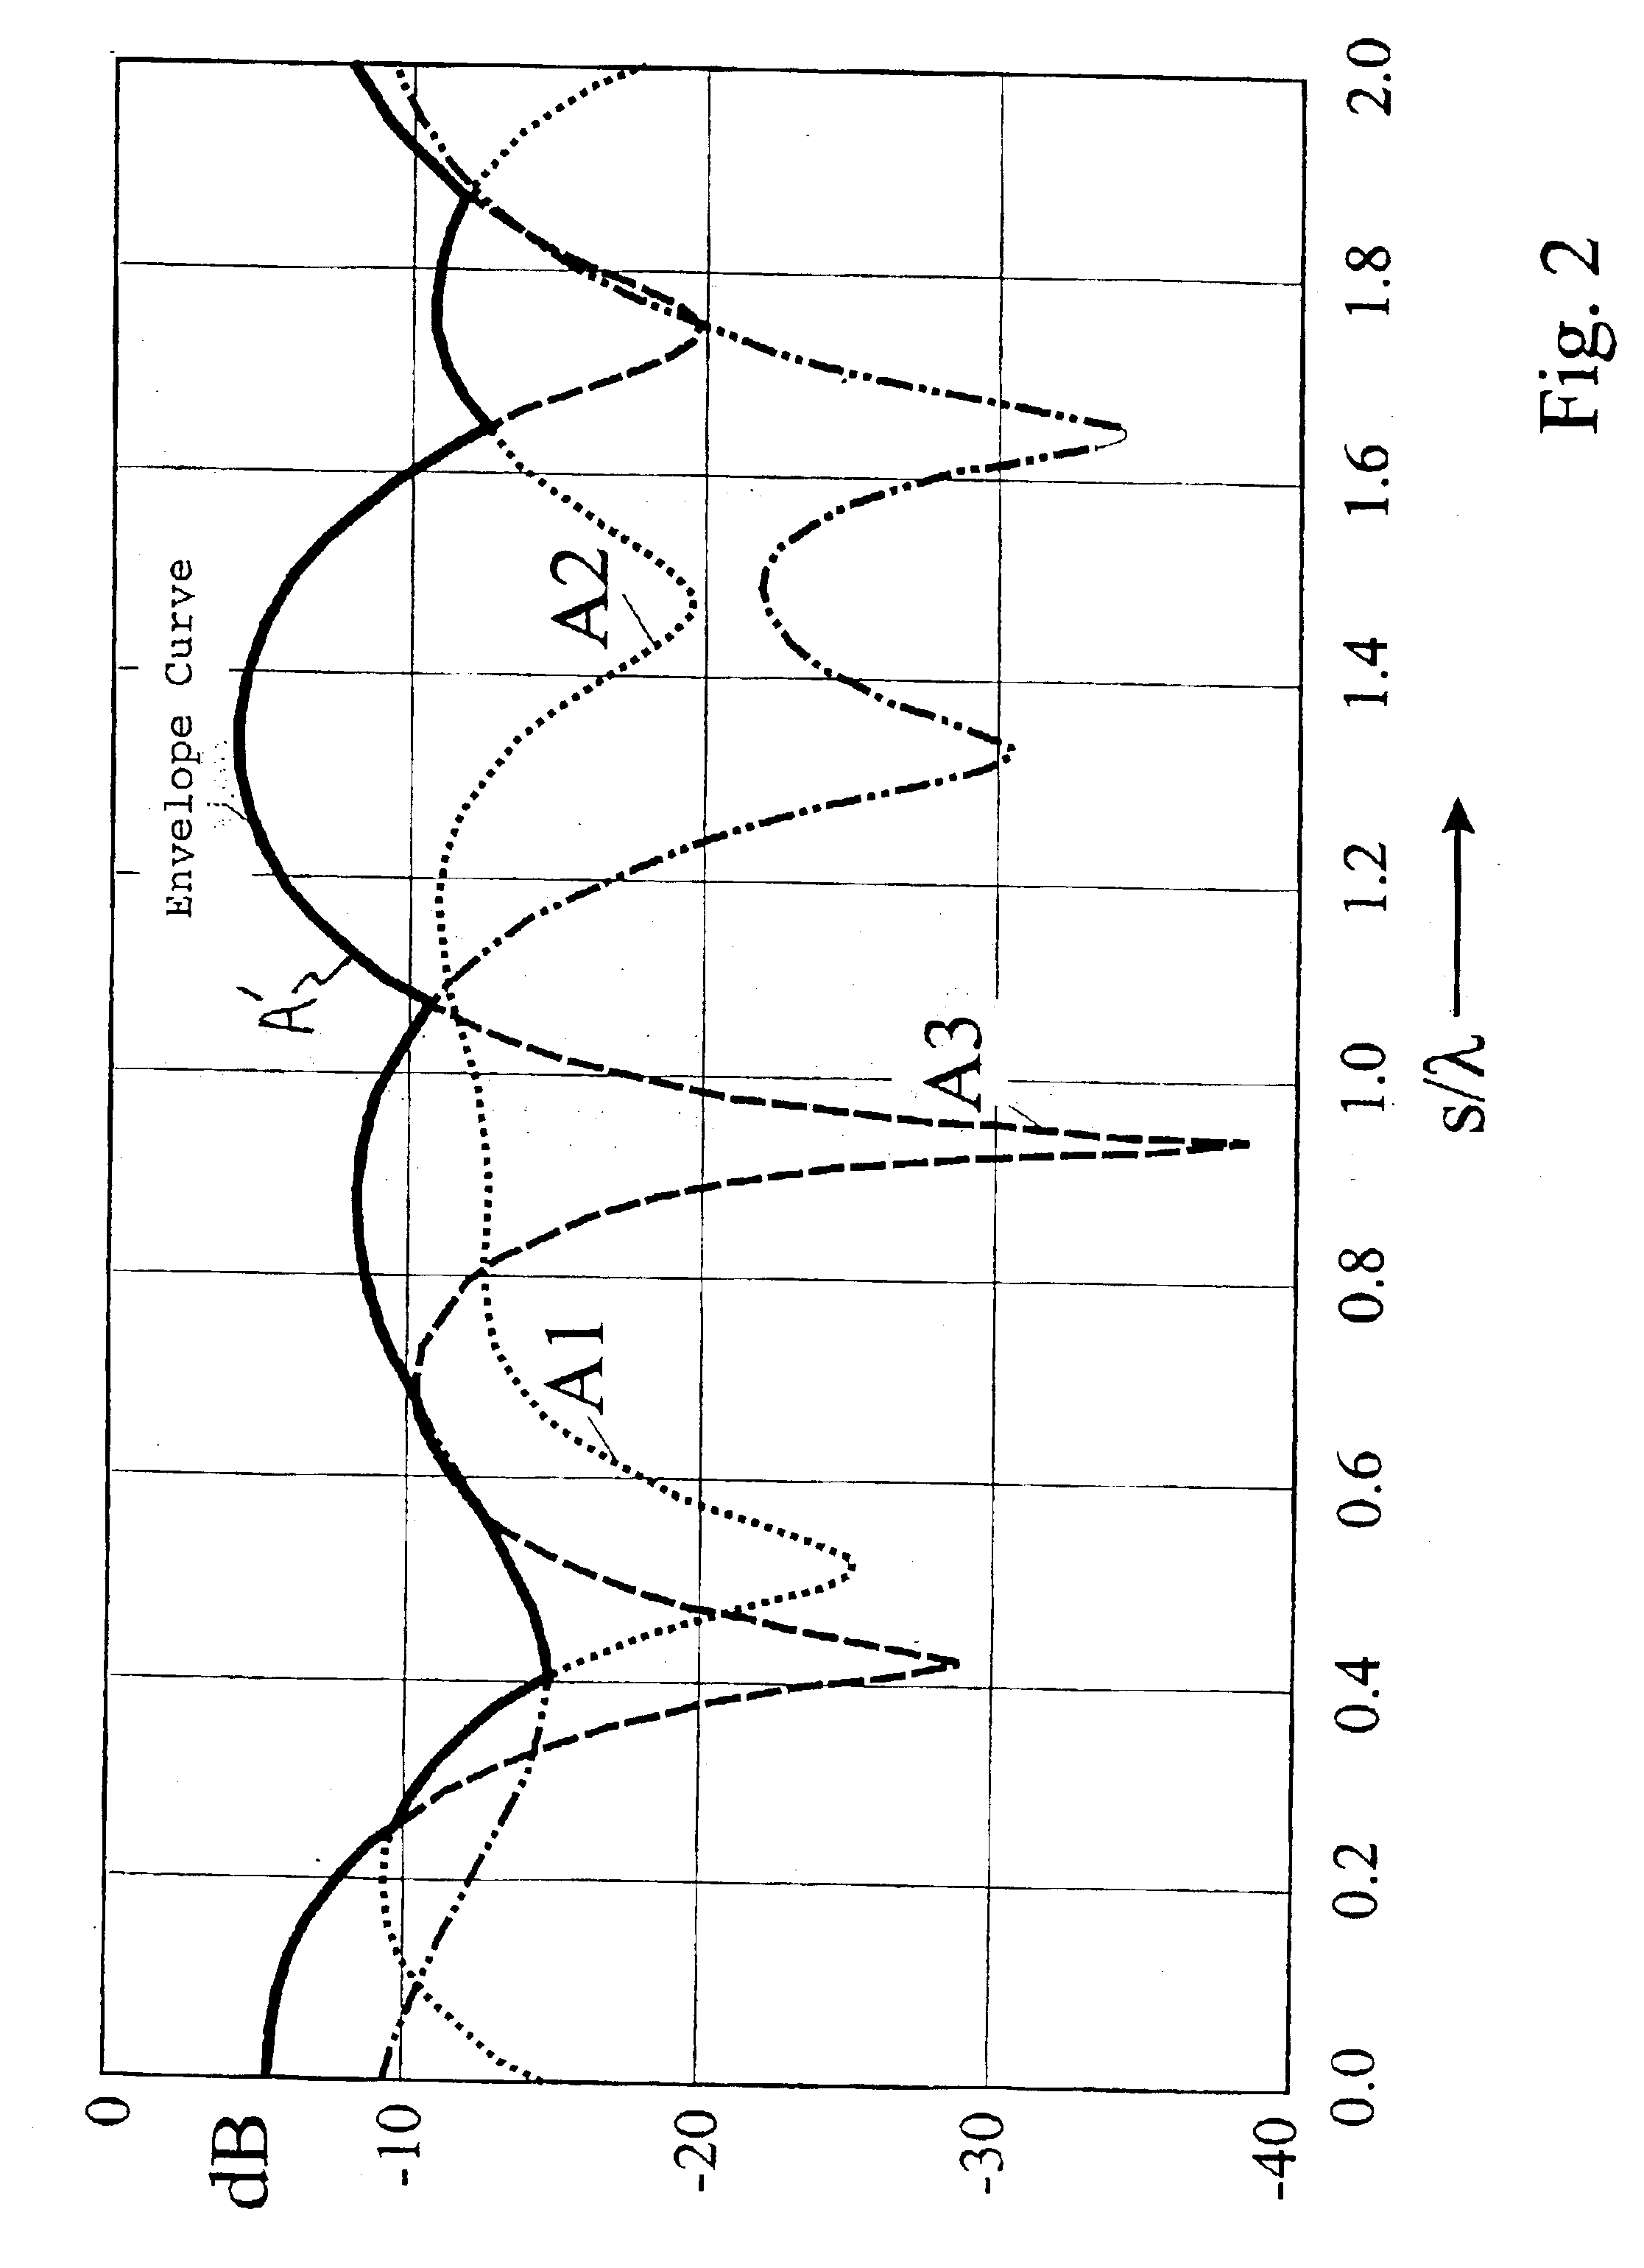 Antenna arrangement for satellite and/or terrestrial radio signals for motor vehicles